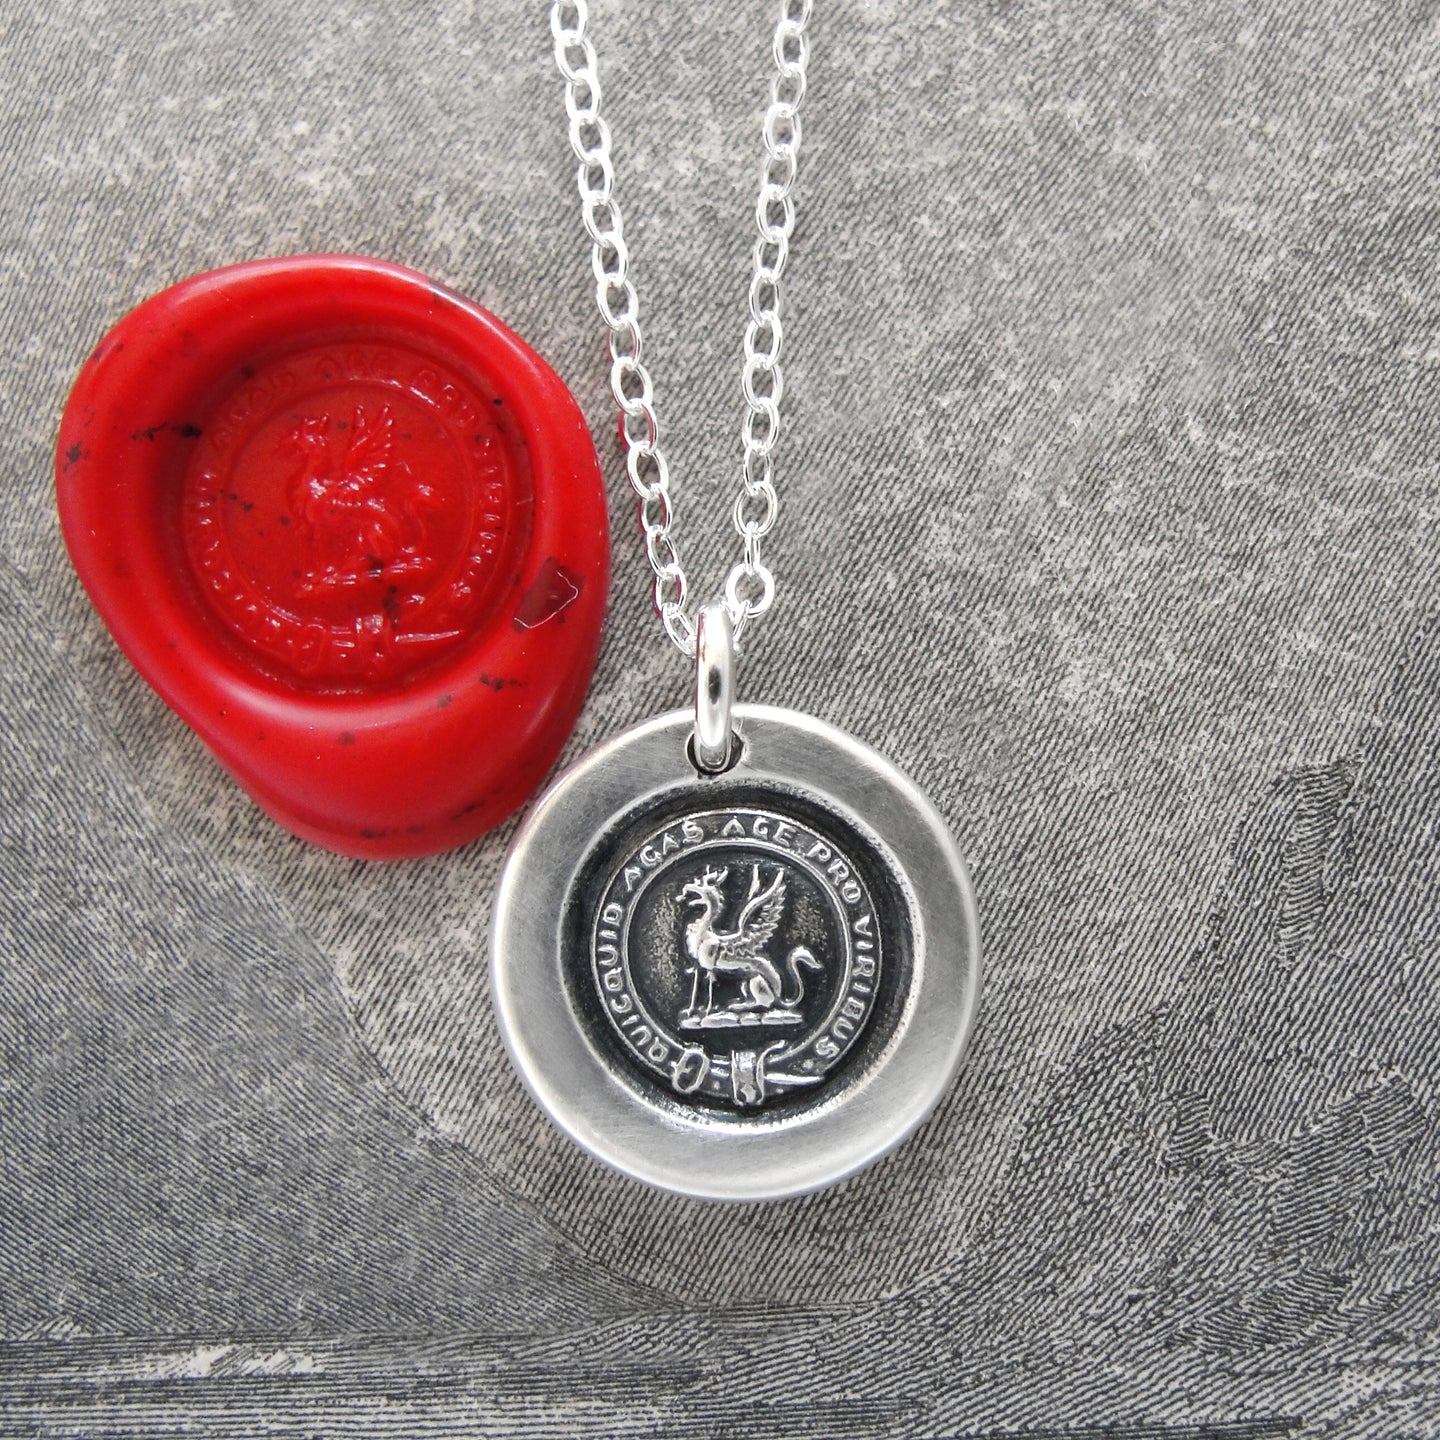 Give It Your All - Silver Griffin Wax Seal Necklace - Strength Symbol 